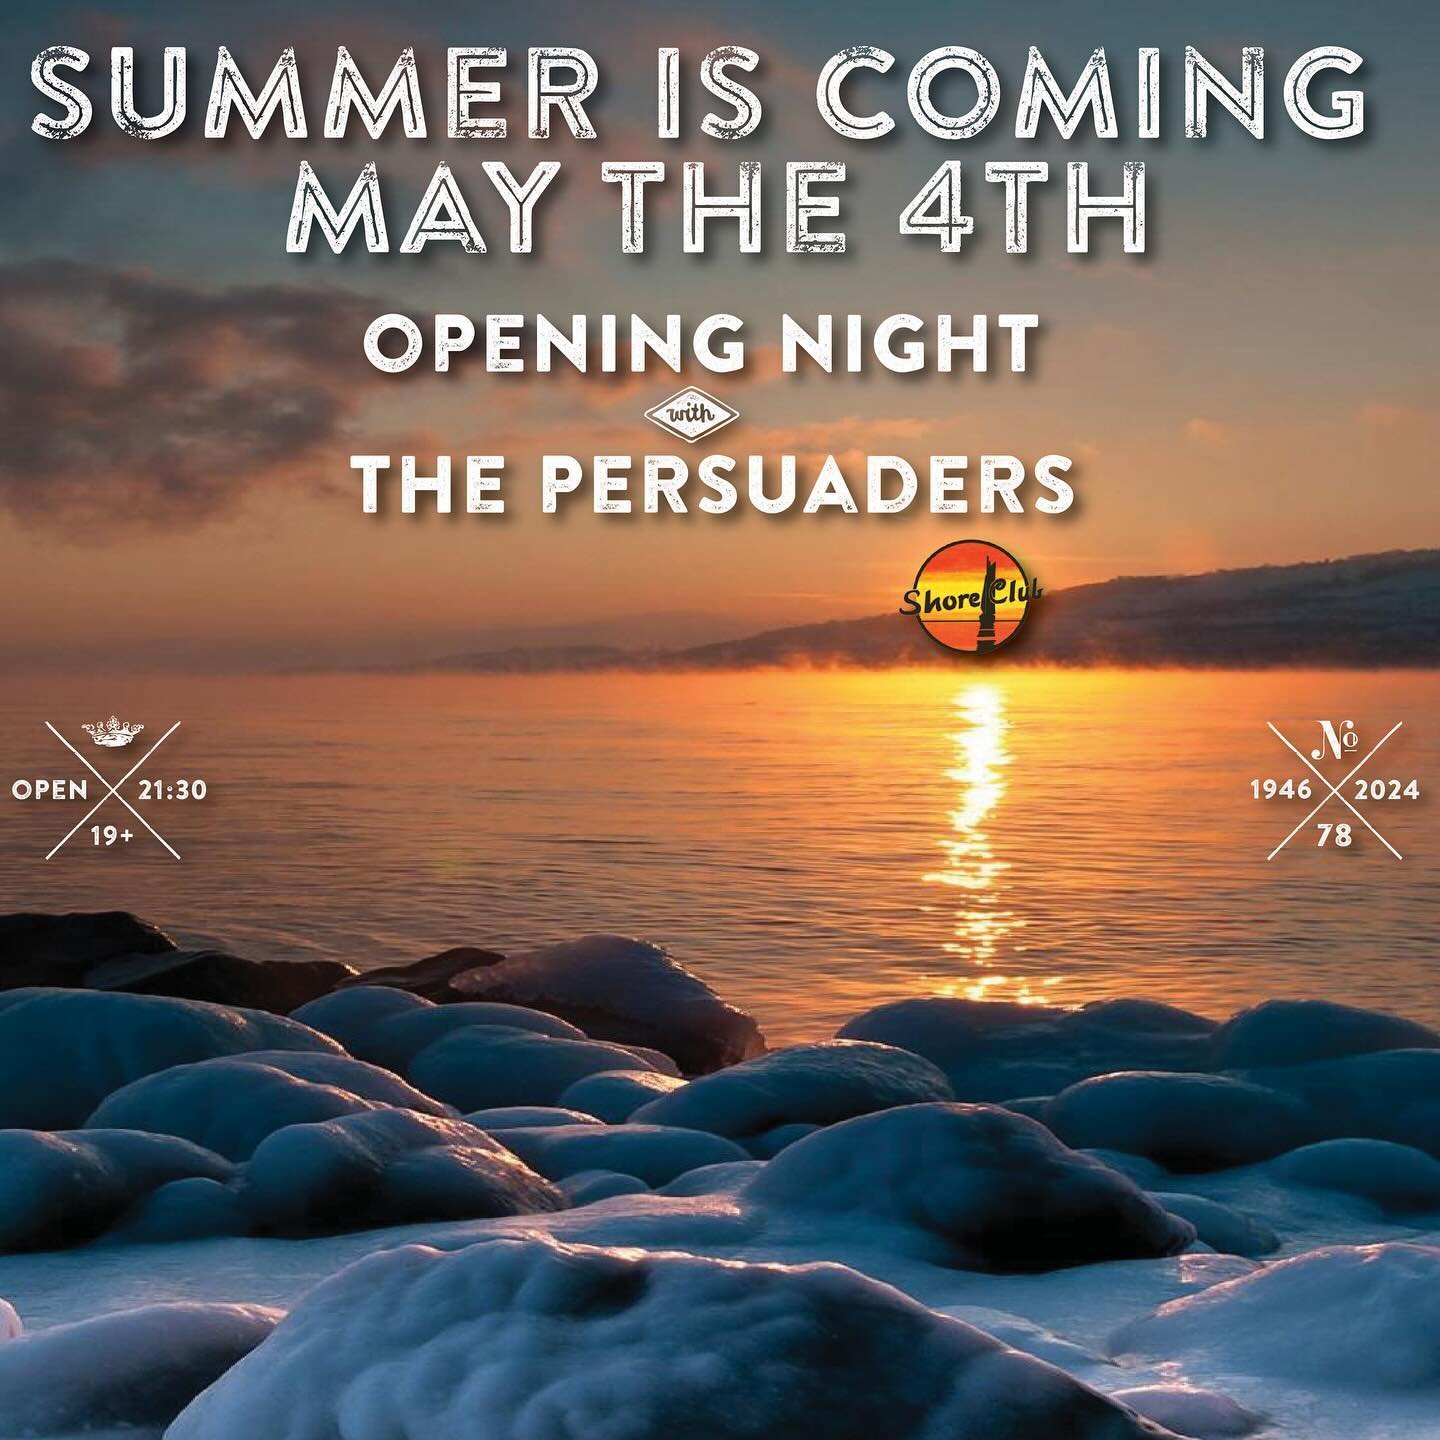 Kicking off our 78th season this Saturday night with The Persuaders! Doors at 9:30, 19+
VIP passes still available for the season email luke@shoreclub.ca to book yours now!
.
#summerof78 #livemusic #shoreclub #lobster